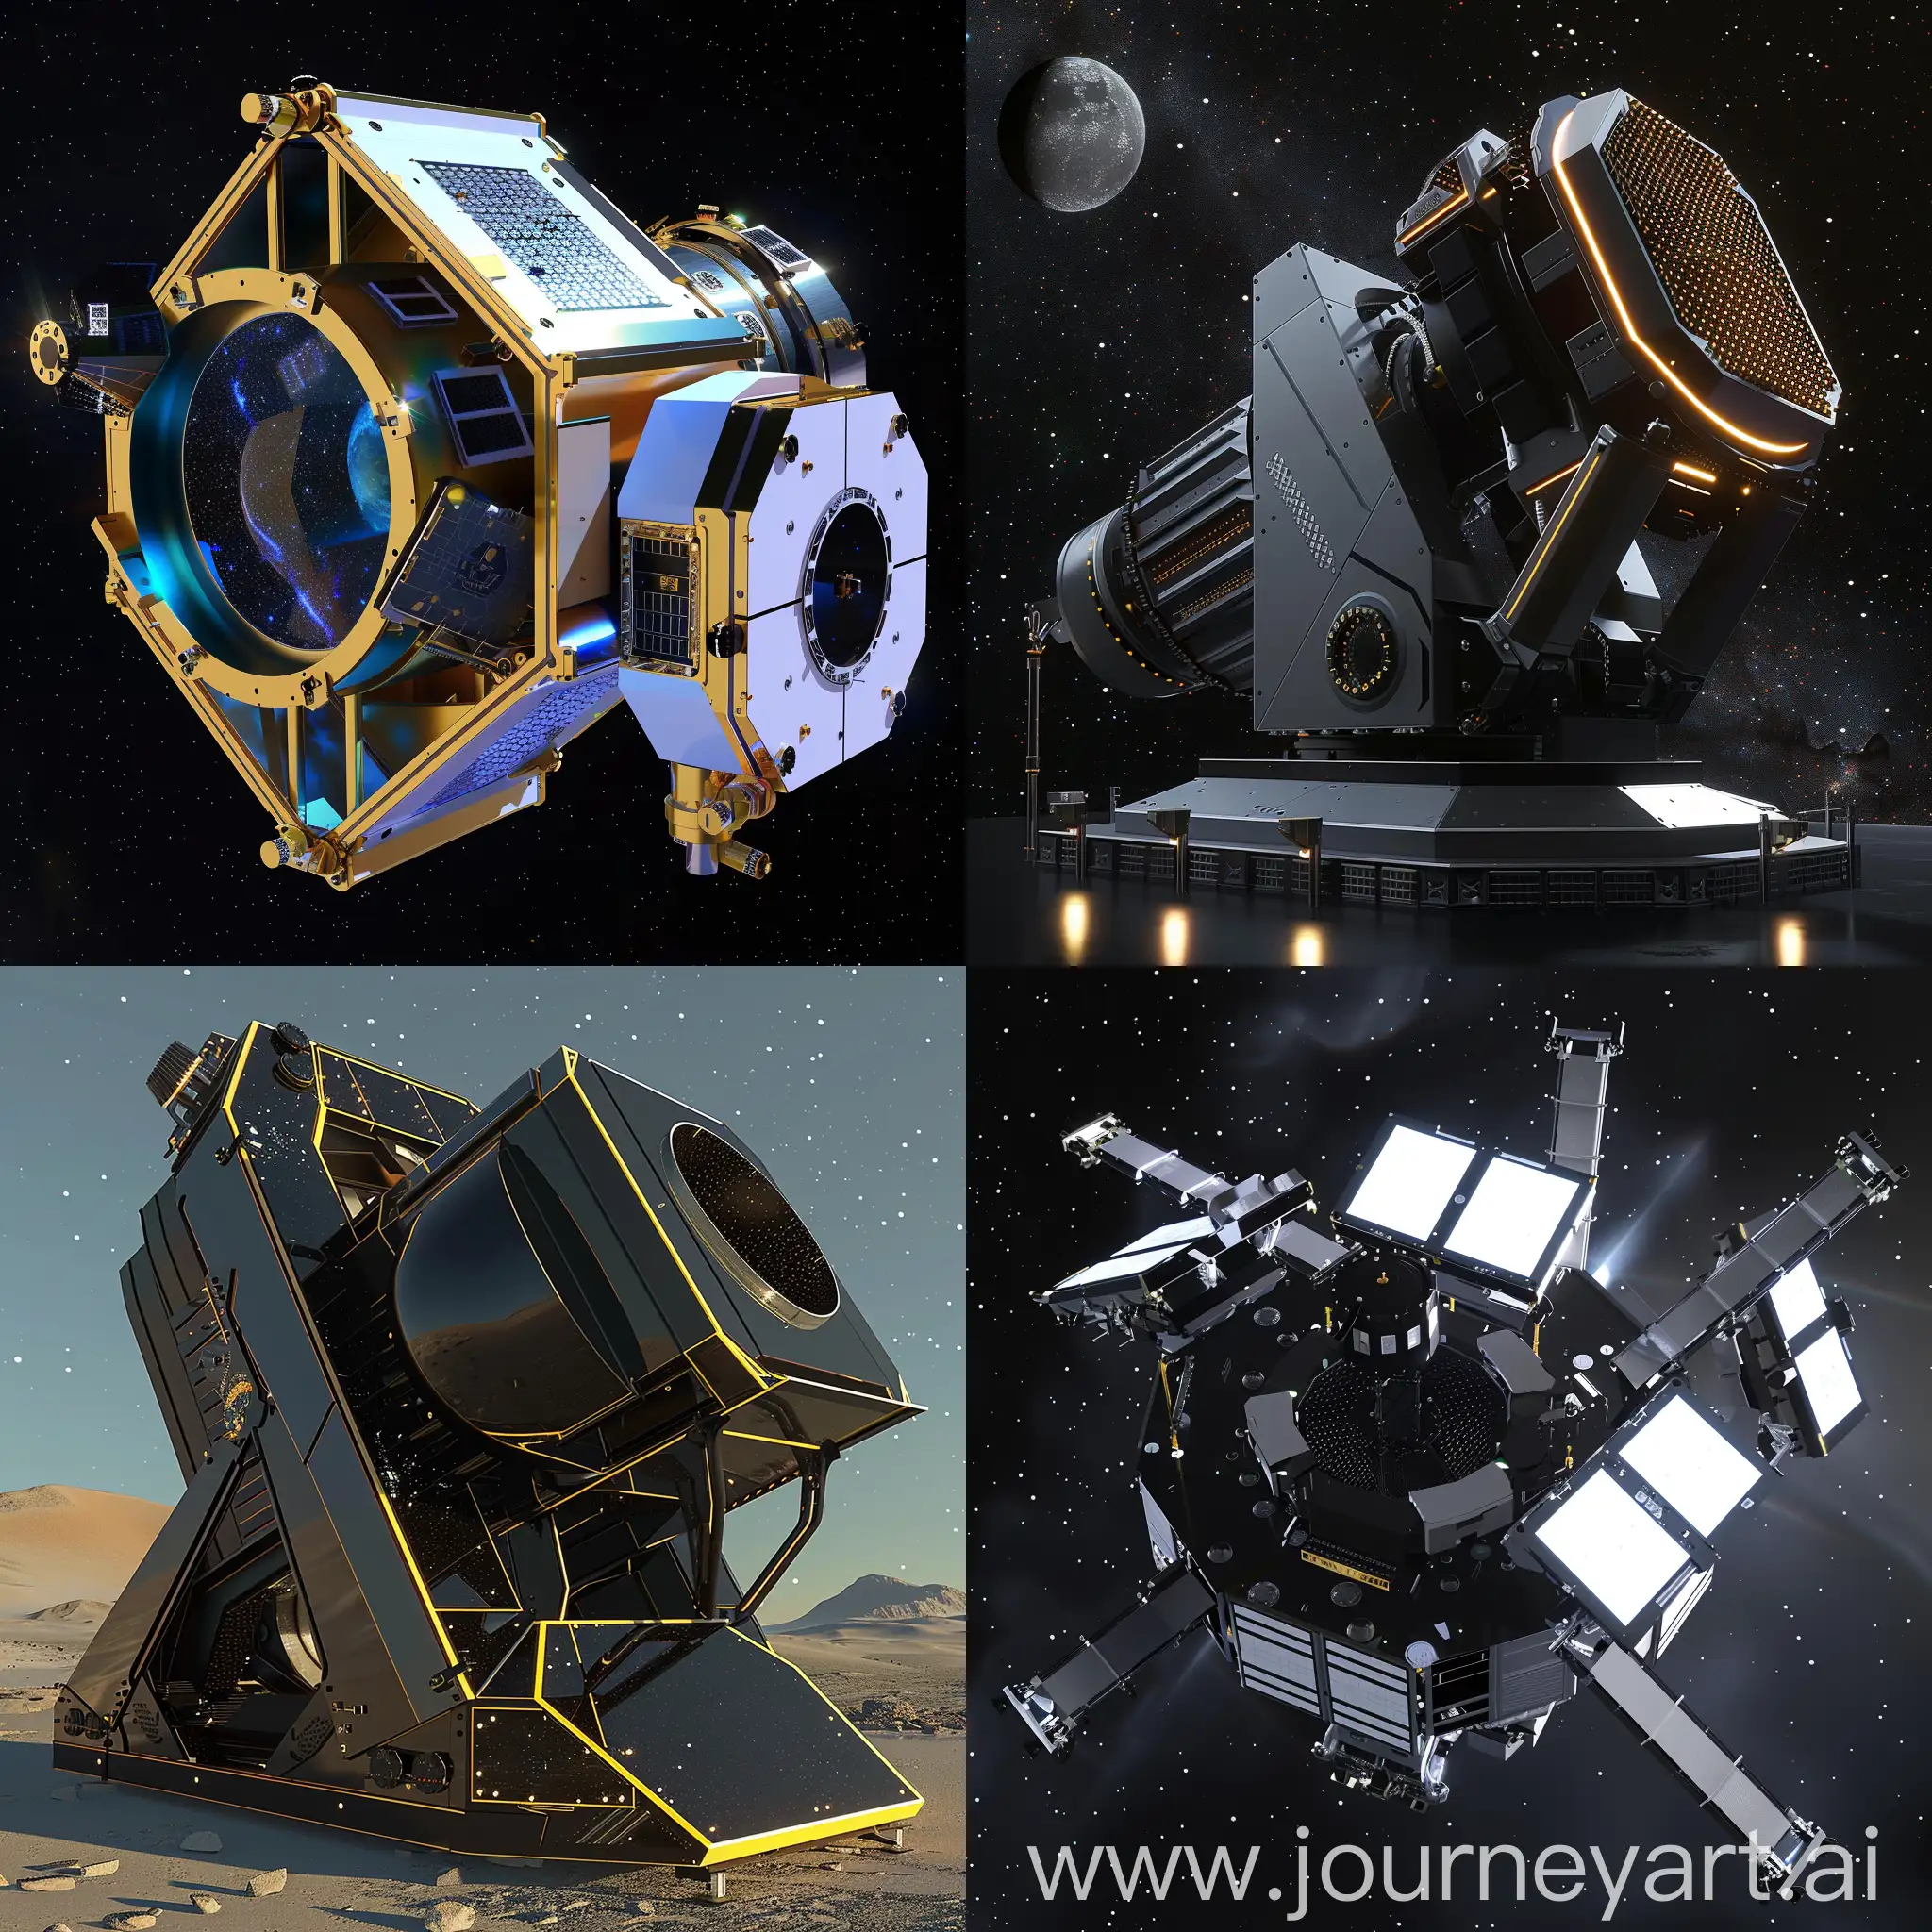 Futuristic space telescope, Quantum Sensors, AI-powered Image Processing Unit (IPU), Self-Deploying Mirror, Modular Design, Interstellar Communication Laser, Onboard Microlensing Occulter, Robotic Arm for Sample Collection, Bioprinting Repair System, Quantum Encryption, VR Interface for Real-Time Telescope Control, Adaptive Optics System powered by AI, Active Debris Avoidance System, Self-Deploying Sunshield, Modular Radiator Panels, Ultra-Lightweight Materials, Integrated 6G Communication Antenna, Interstellar Communication Array, Docking Ports for Robotic Servicing, Self-Assembly Capabilities, Onboard Power Generation, in unreal engine 5 style --stylize 1000